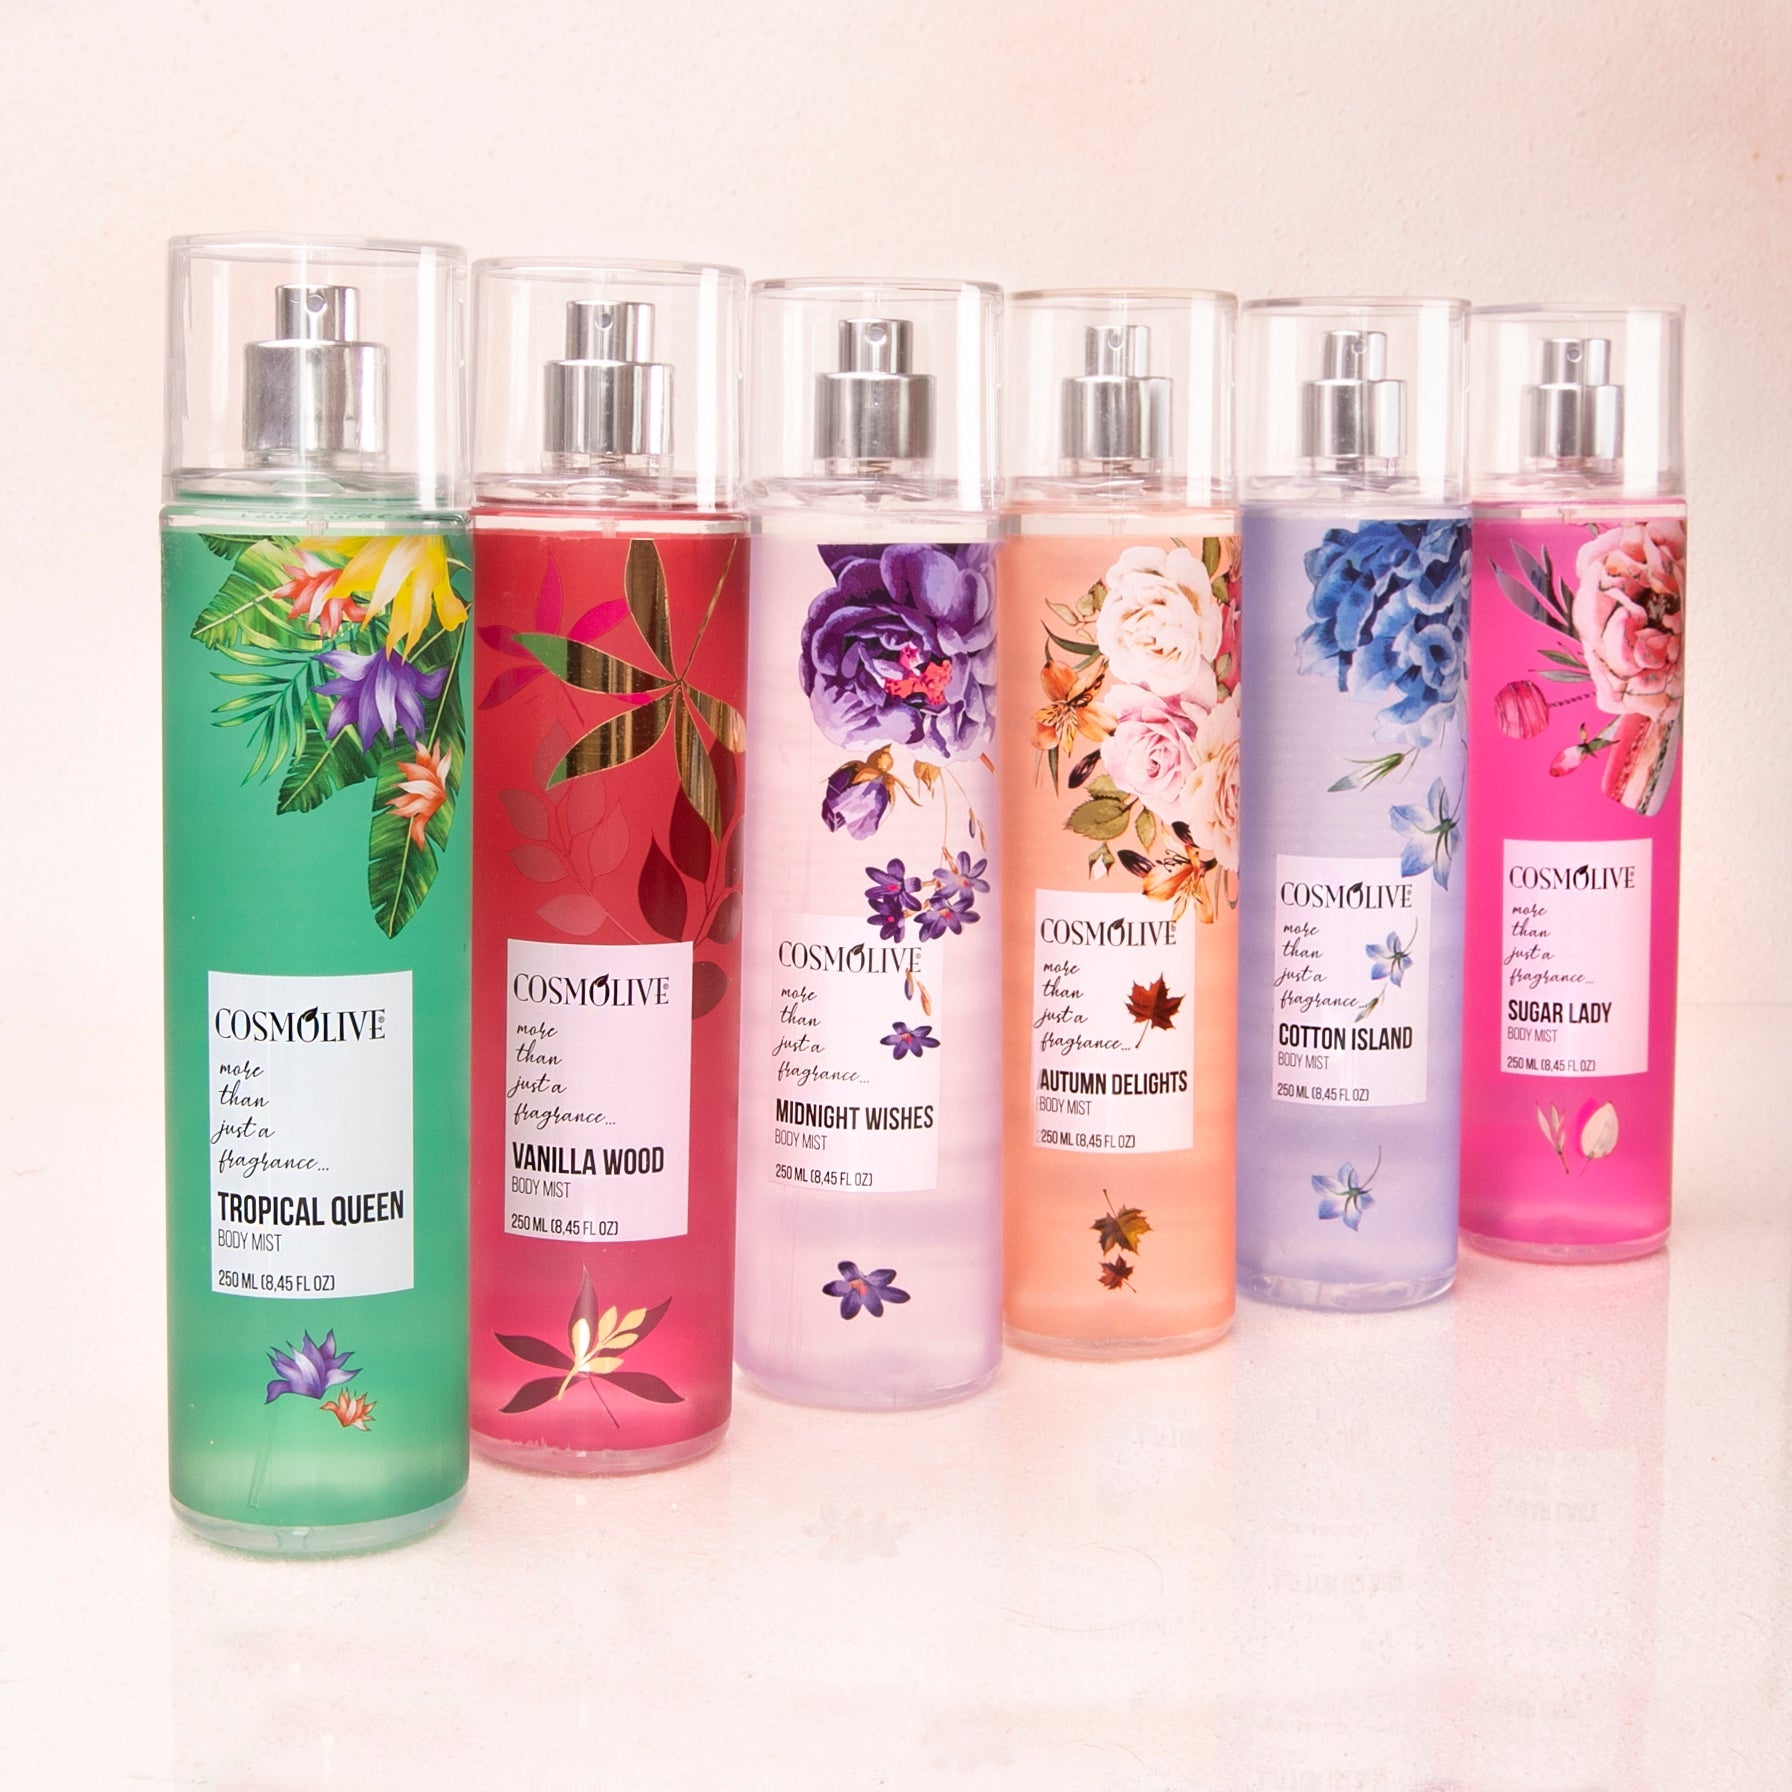 COSMOLIVE BODY MIST 250 ml Tropical Queen / The Excellent Composition of Nature With The Fruit and Floral Essences / Natural Life